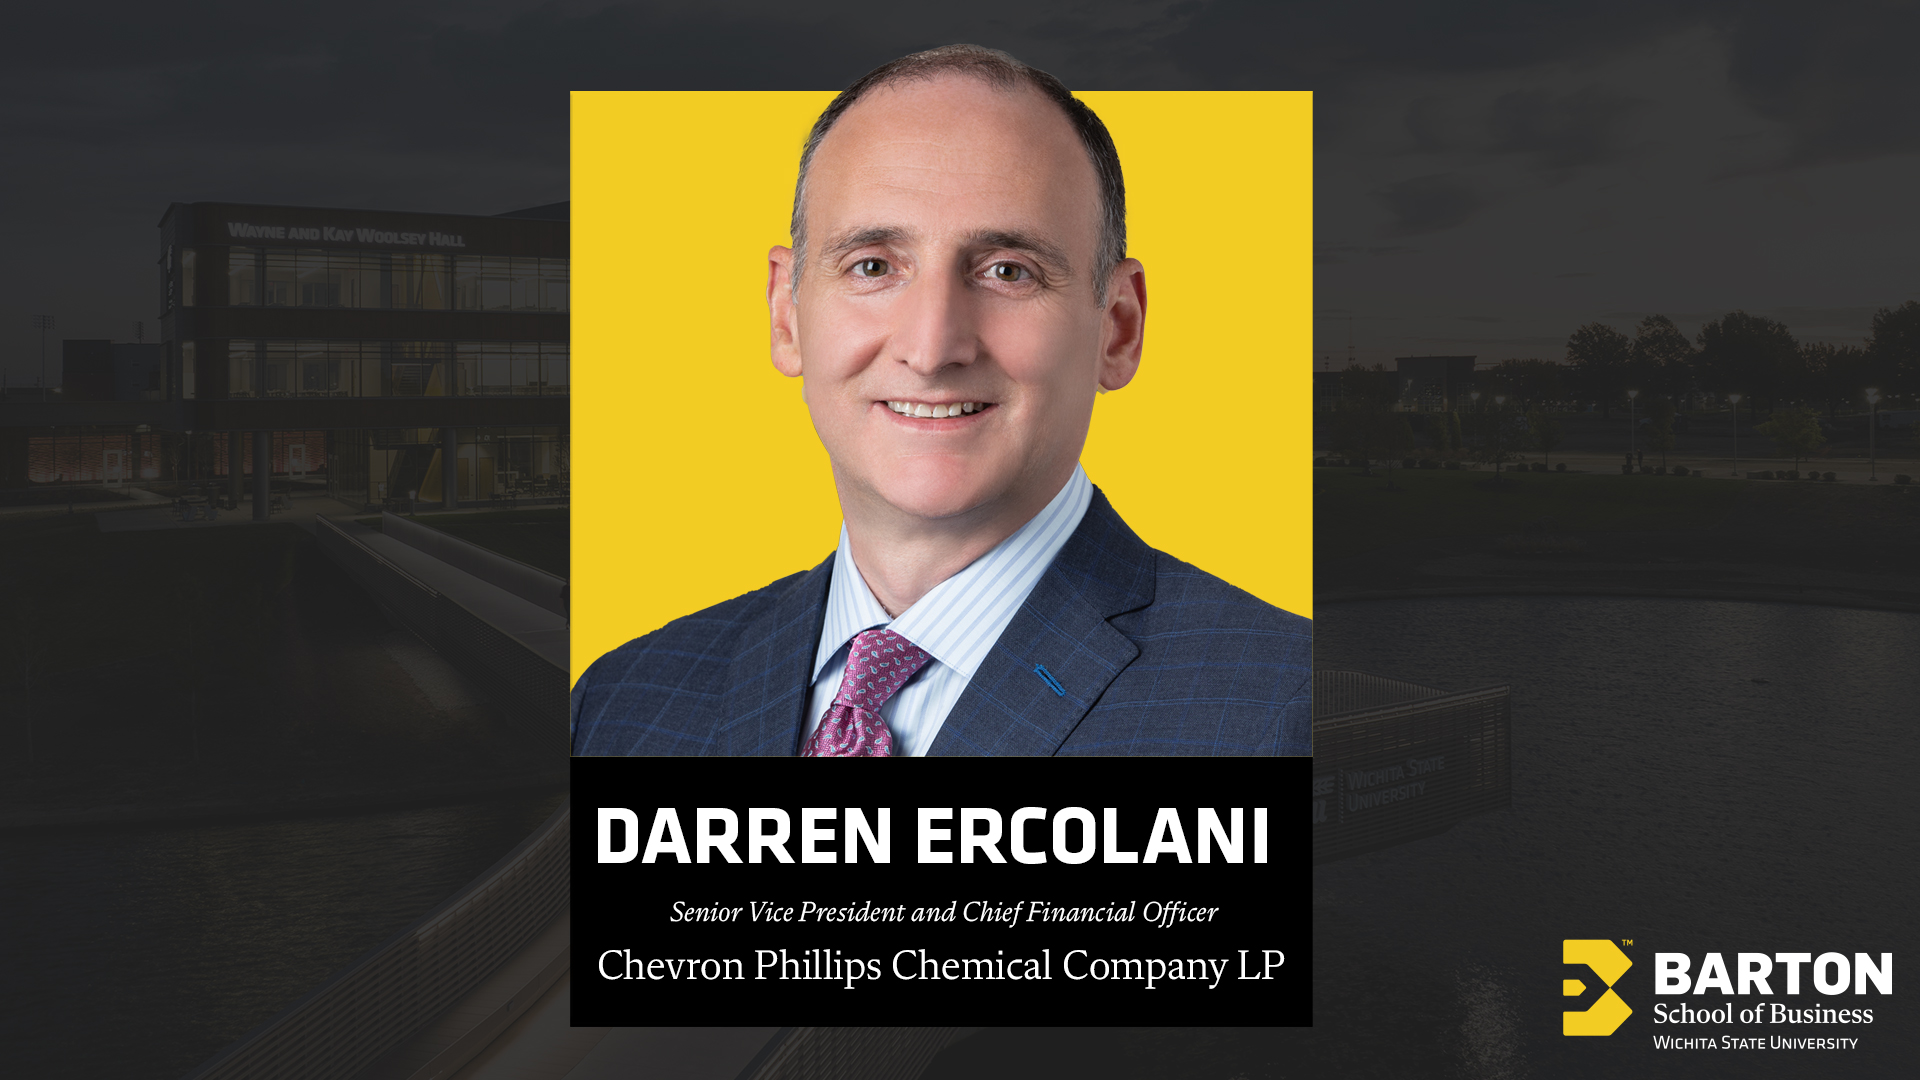 Darren Ercolani, Senior Vice President and Chief Financial Officer for Chevron Phillips Chemical Company LP.